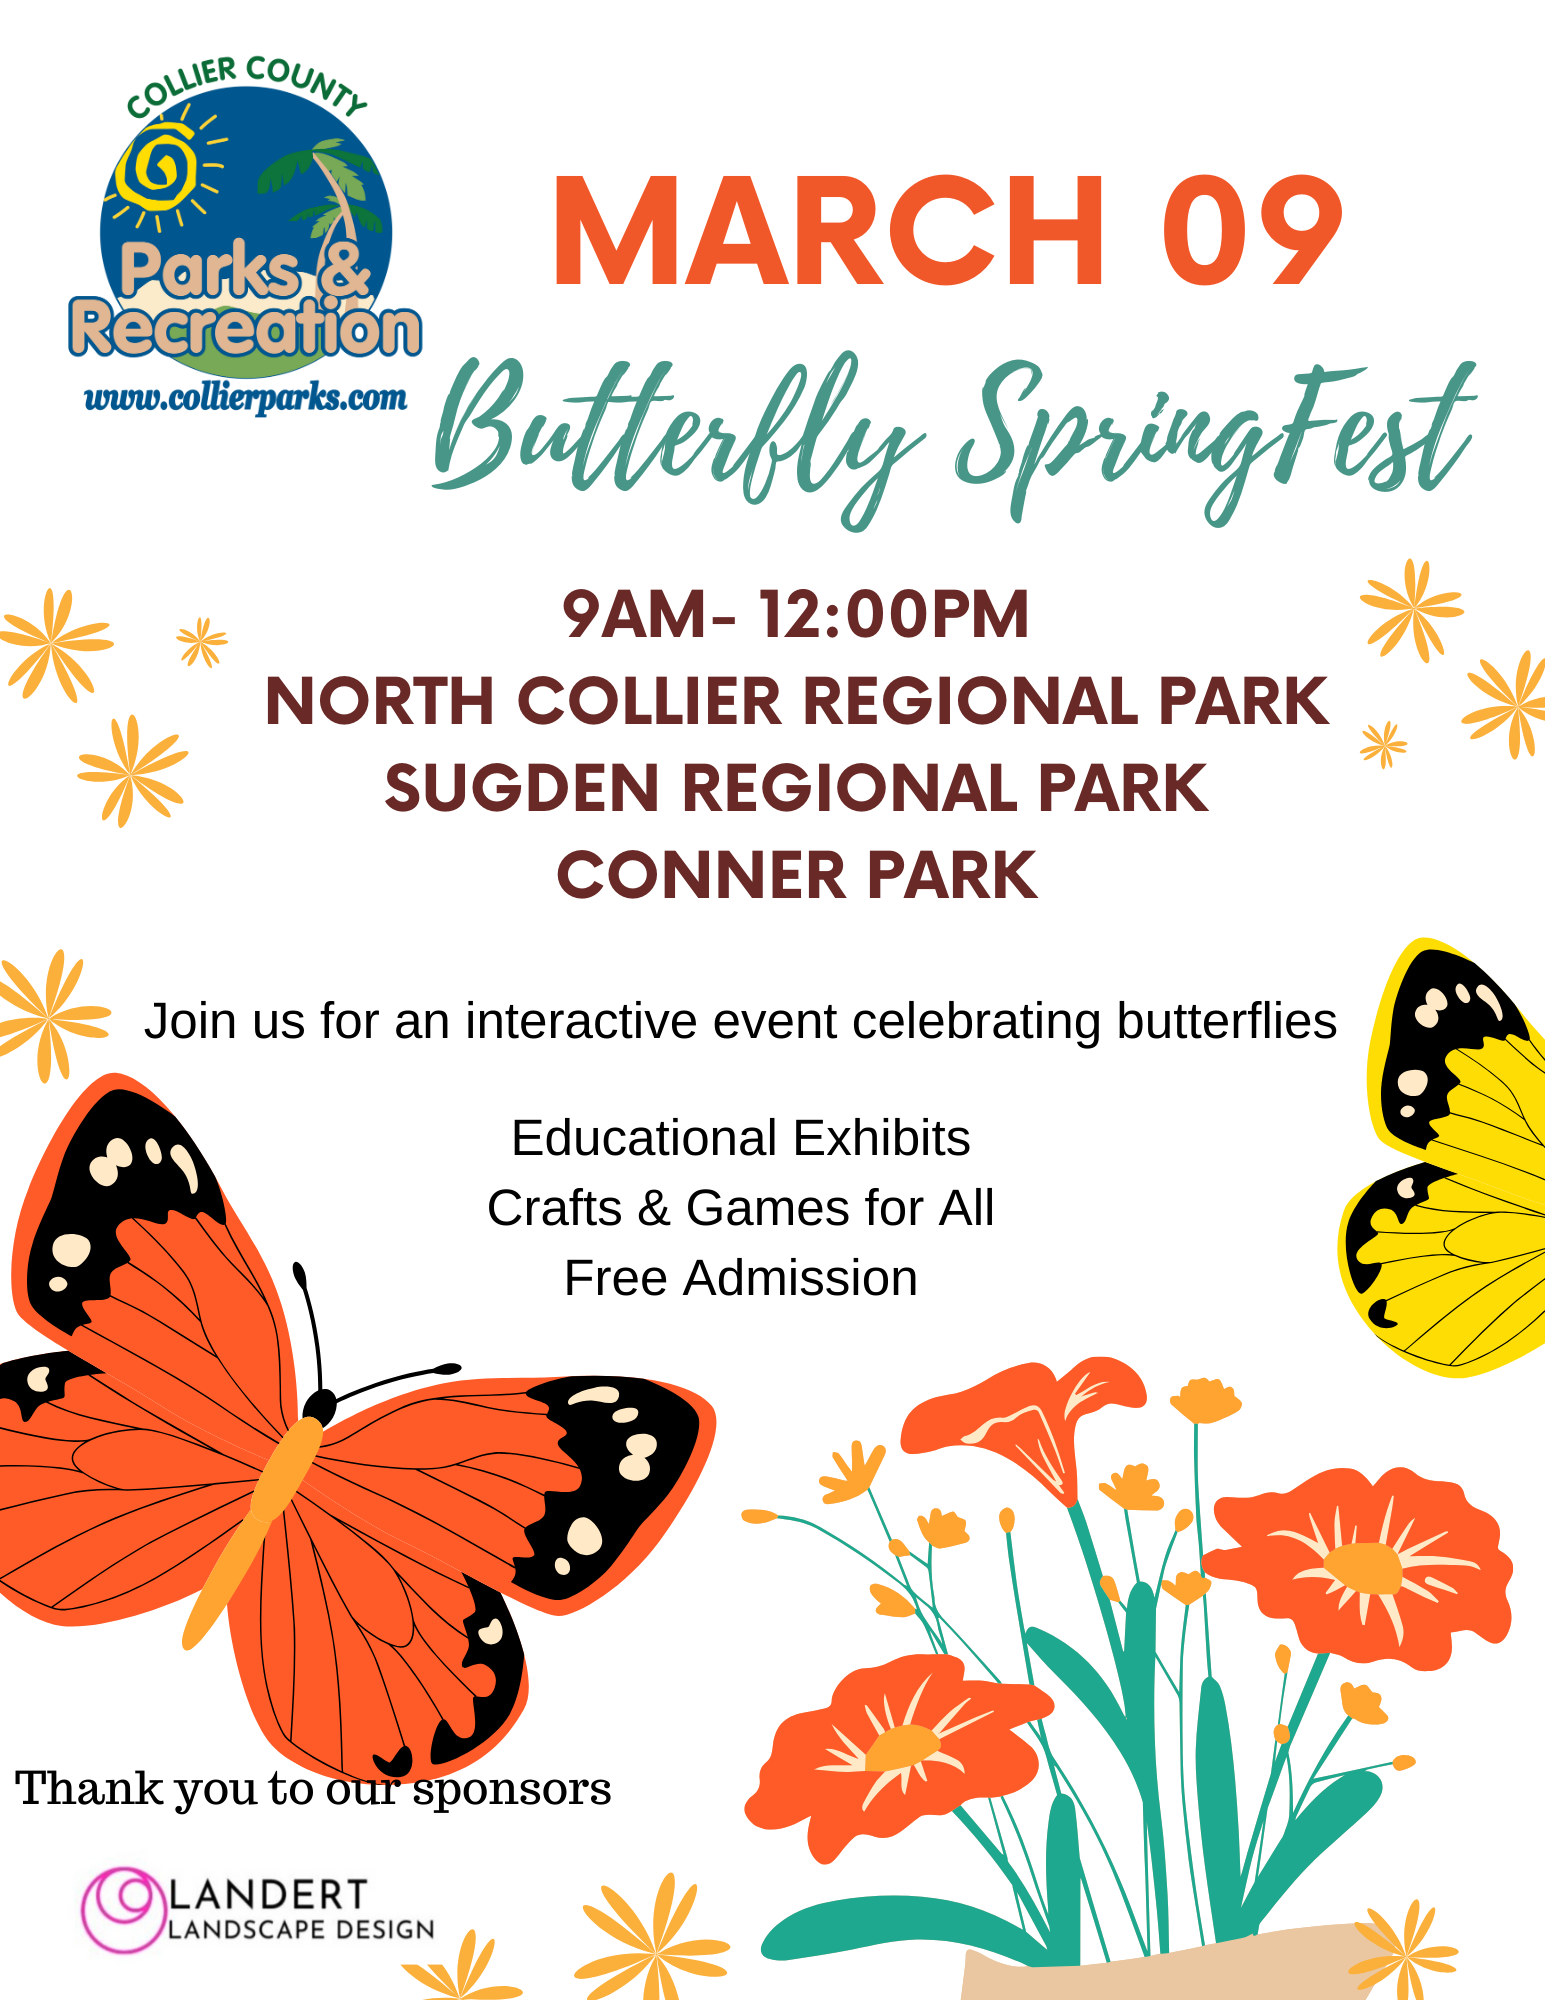 BUTTERFLY SPRING FEST AT CONNER PARK